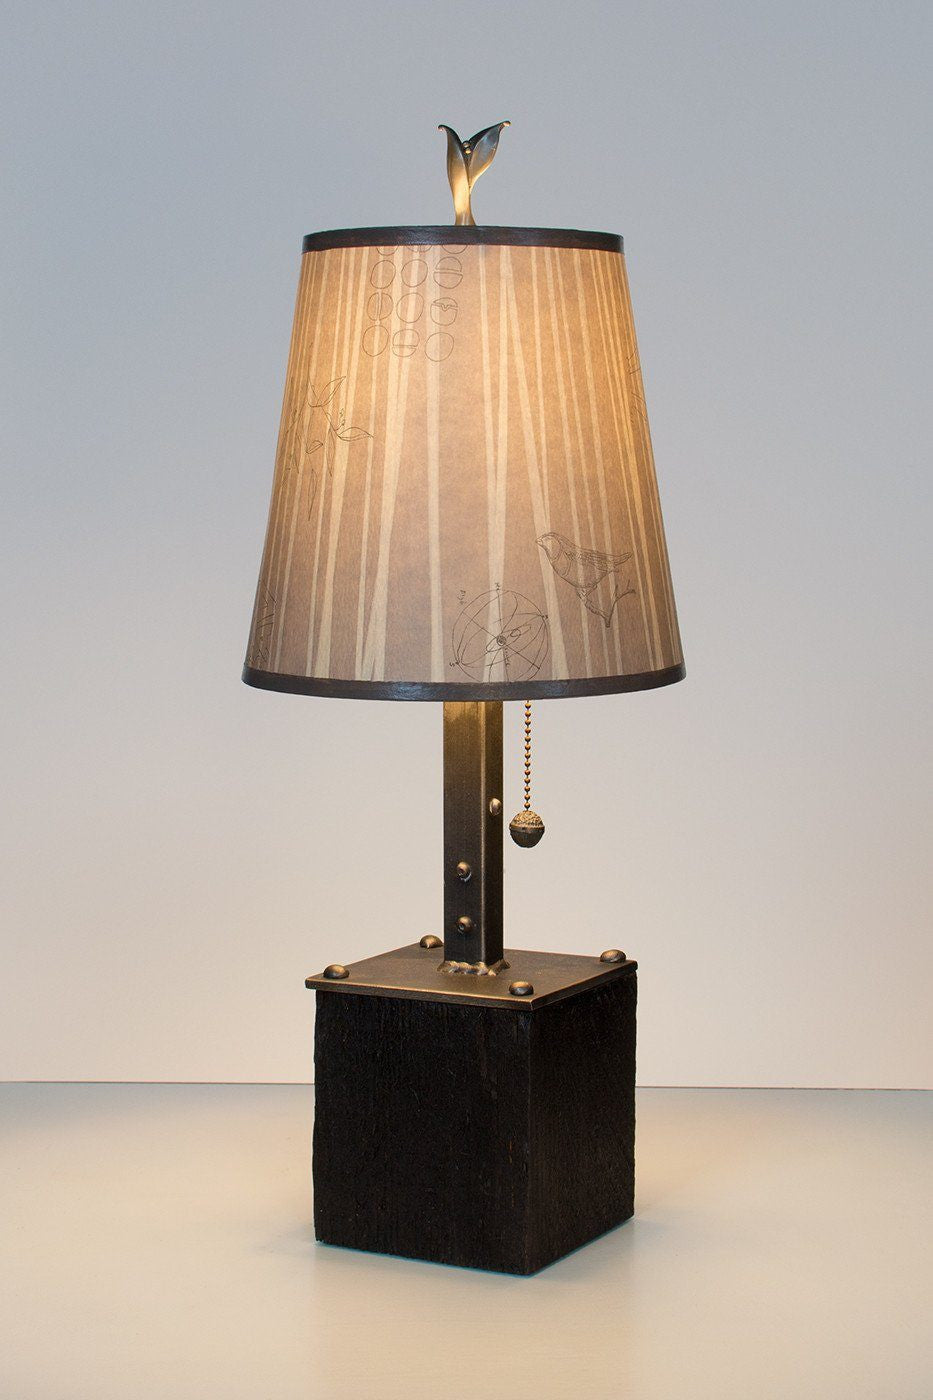 Steel Table Lamp on Reclaimed Wood with Small Drum Shade in Birch Lit